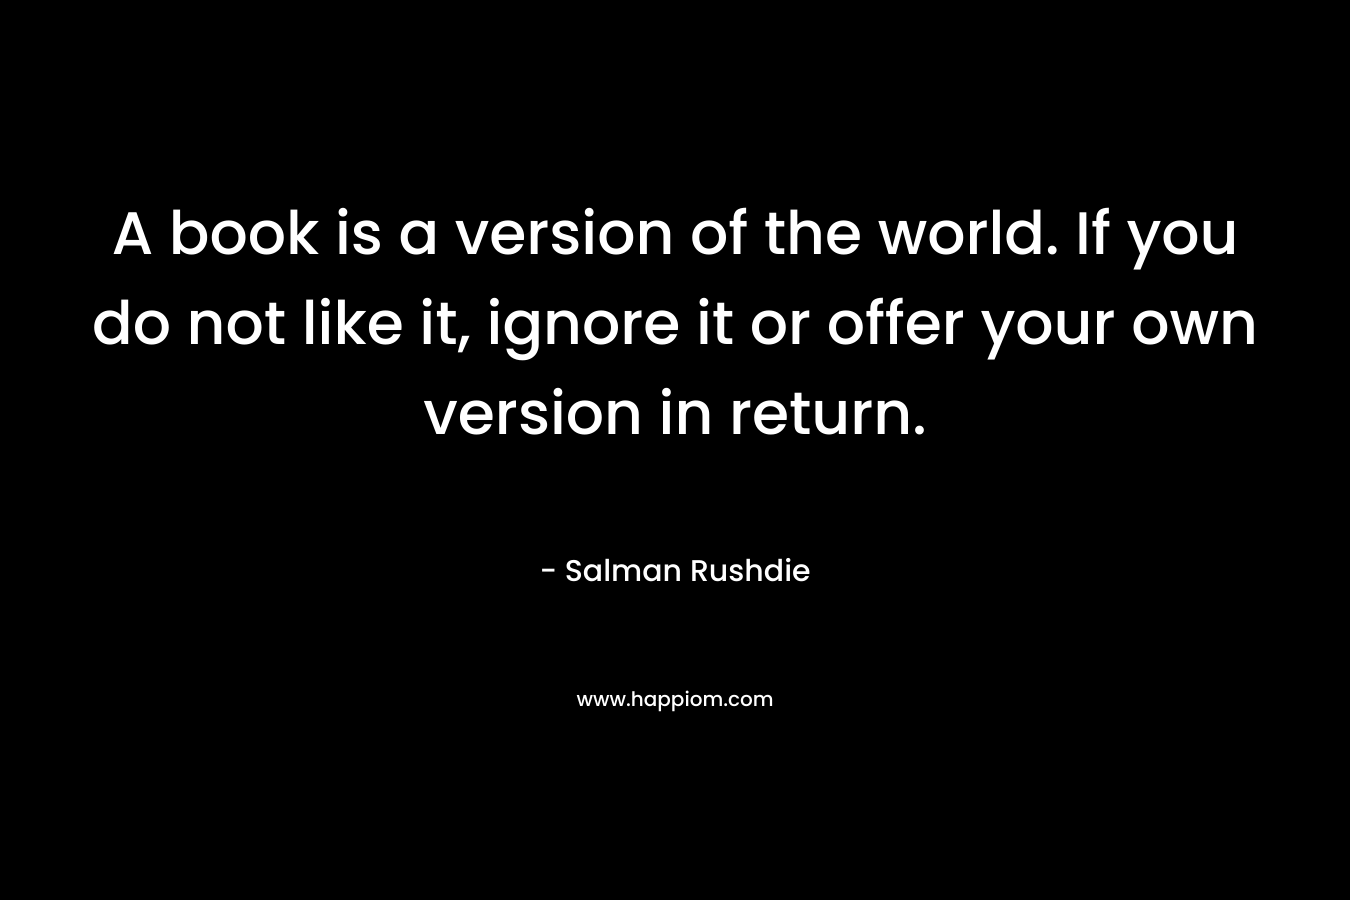 A book is a version of the world. If you do not like it, ignore it or offer your own version in return.